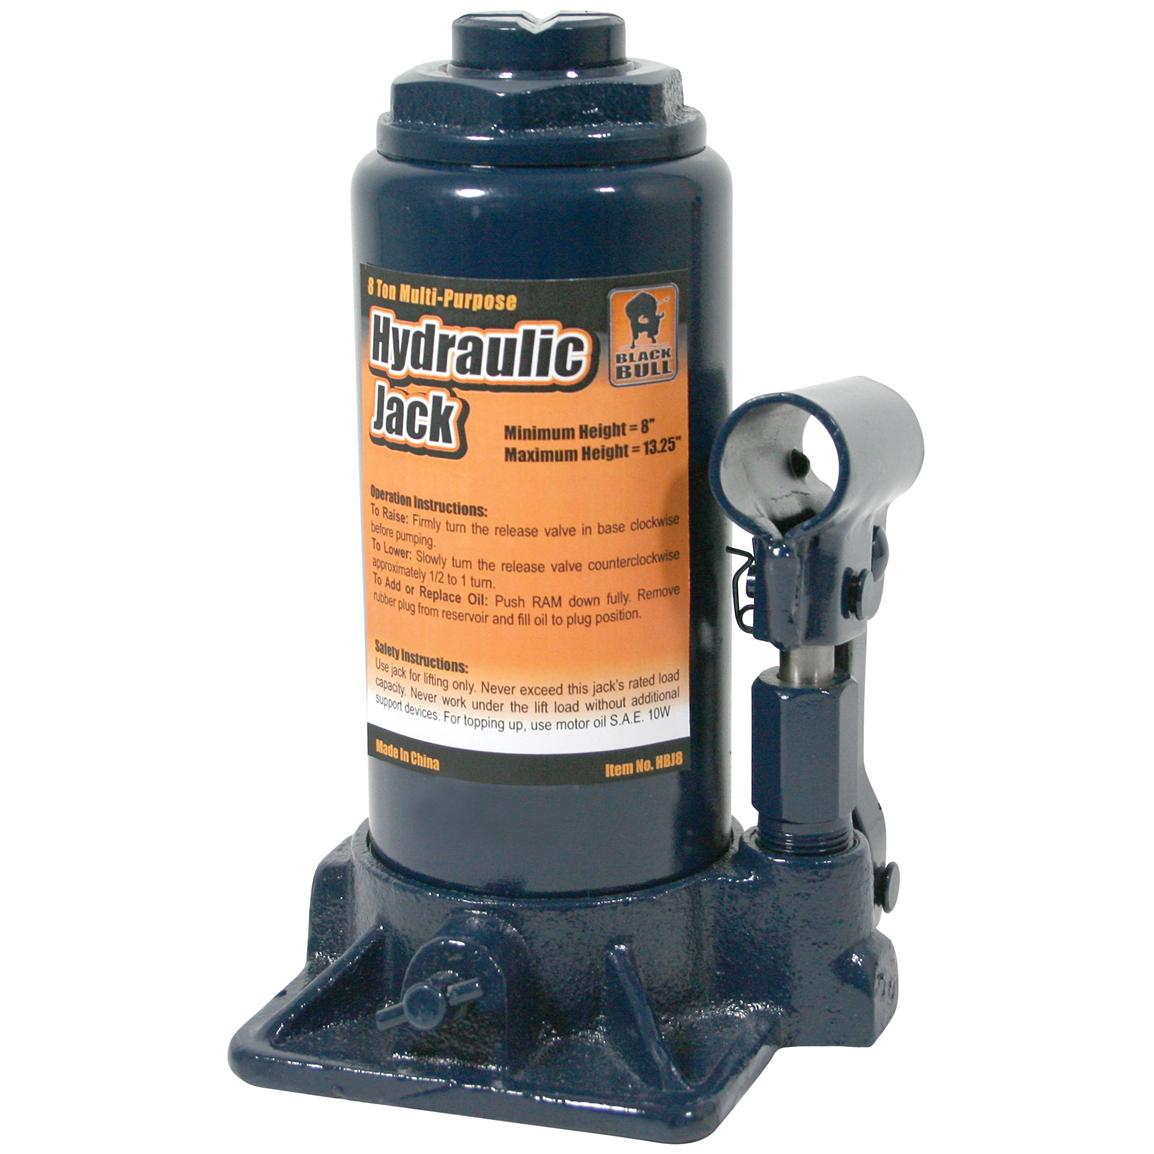 What is the purpose of a hydraulic jack?